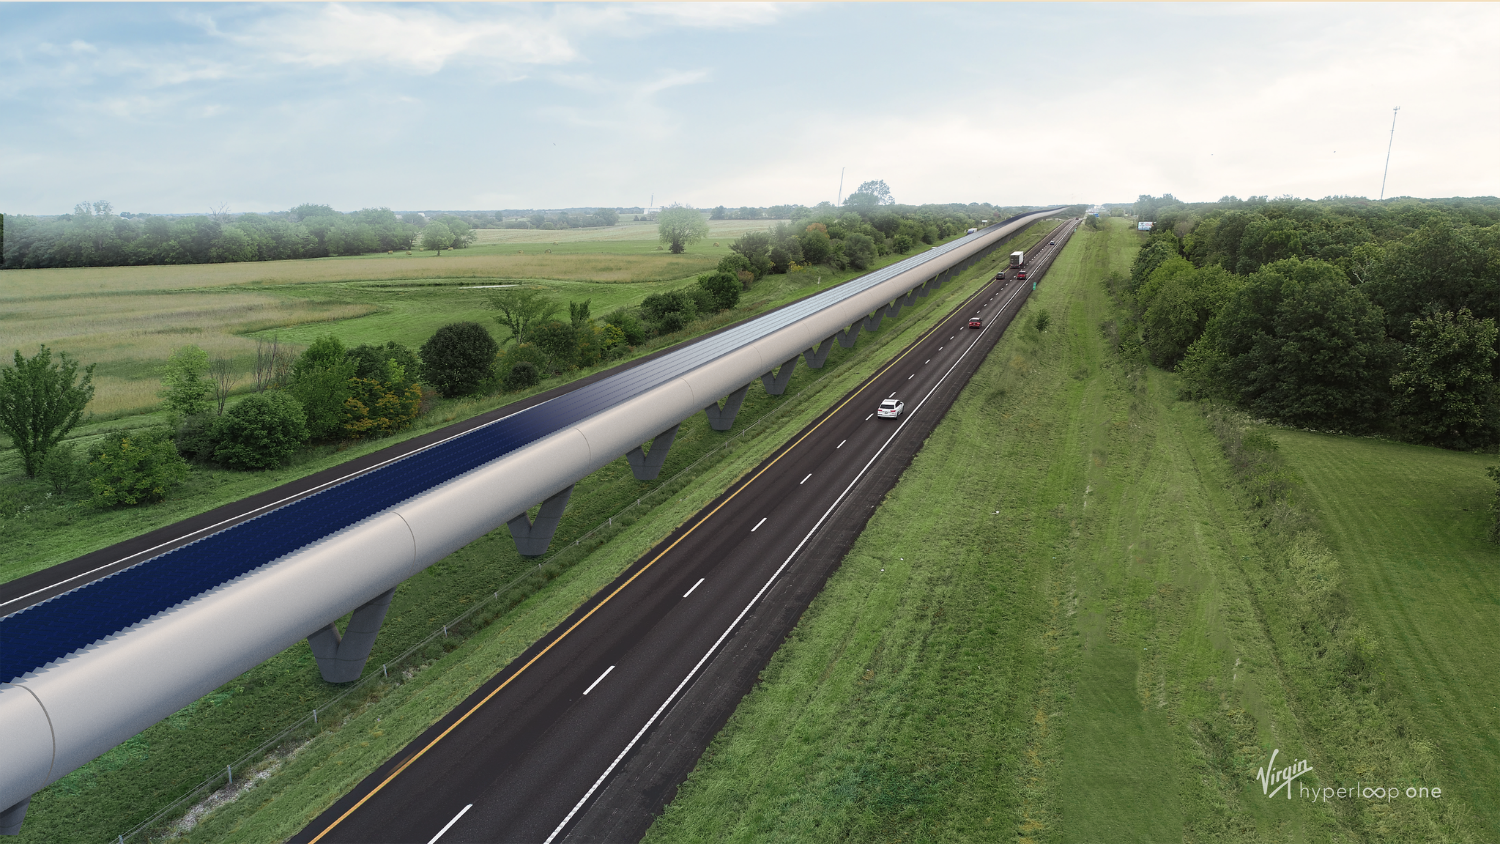 Hyperloop would boost Missouri economy, study says | KCUR